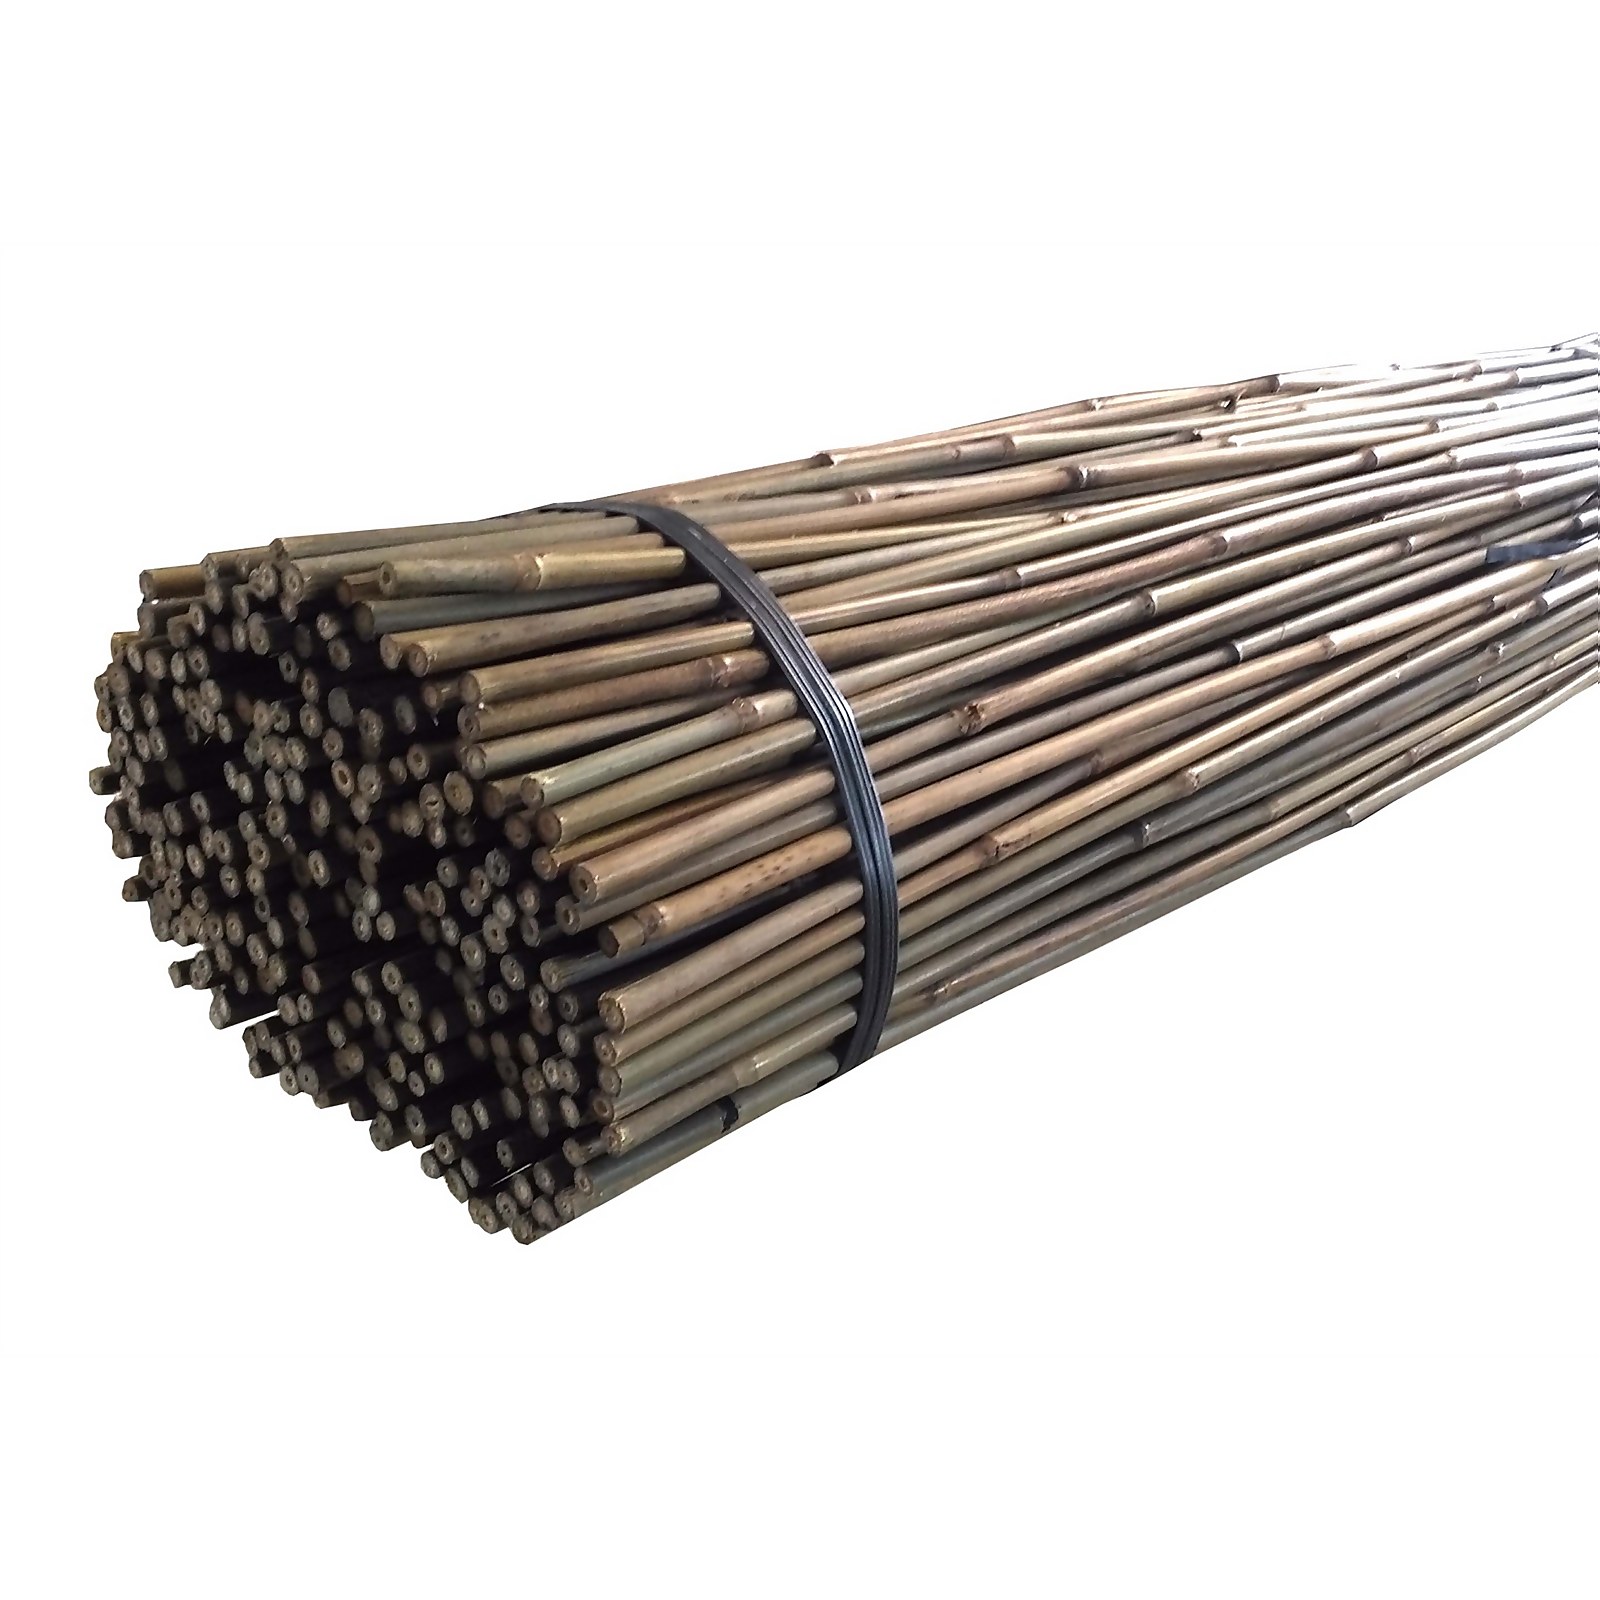 Photo of 10 Pack Bamboo Canes - 2.4m/8ft